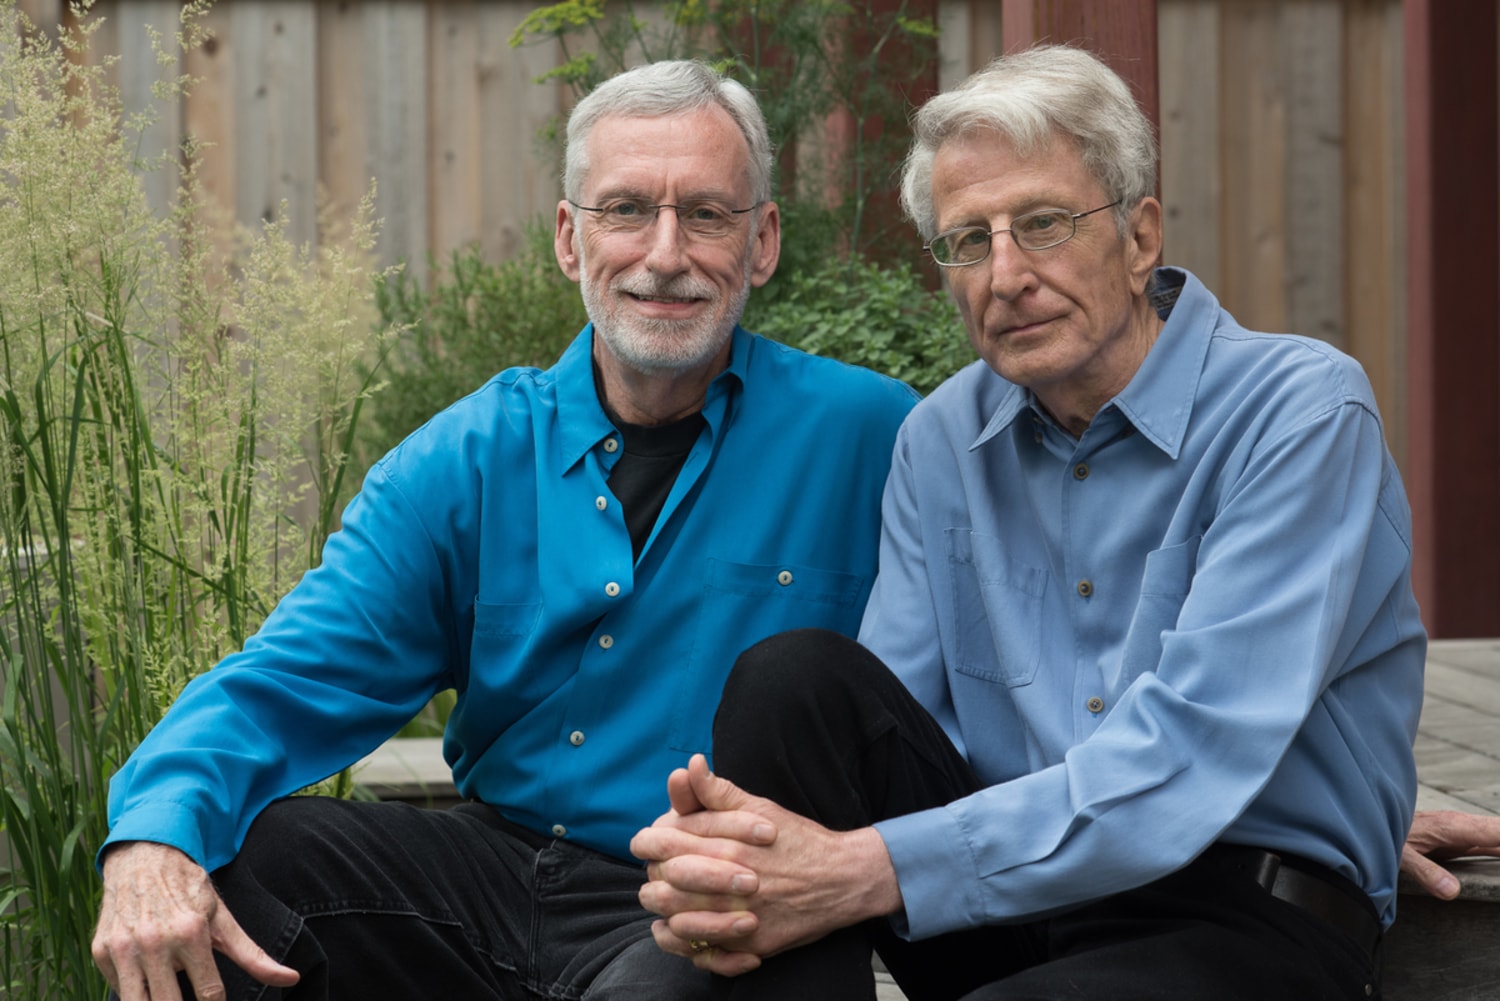 After decades-long legal battle, gay couples 1971 marriage officially recognized image picture